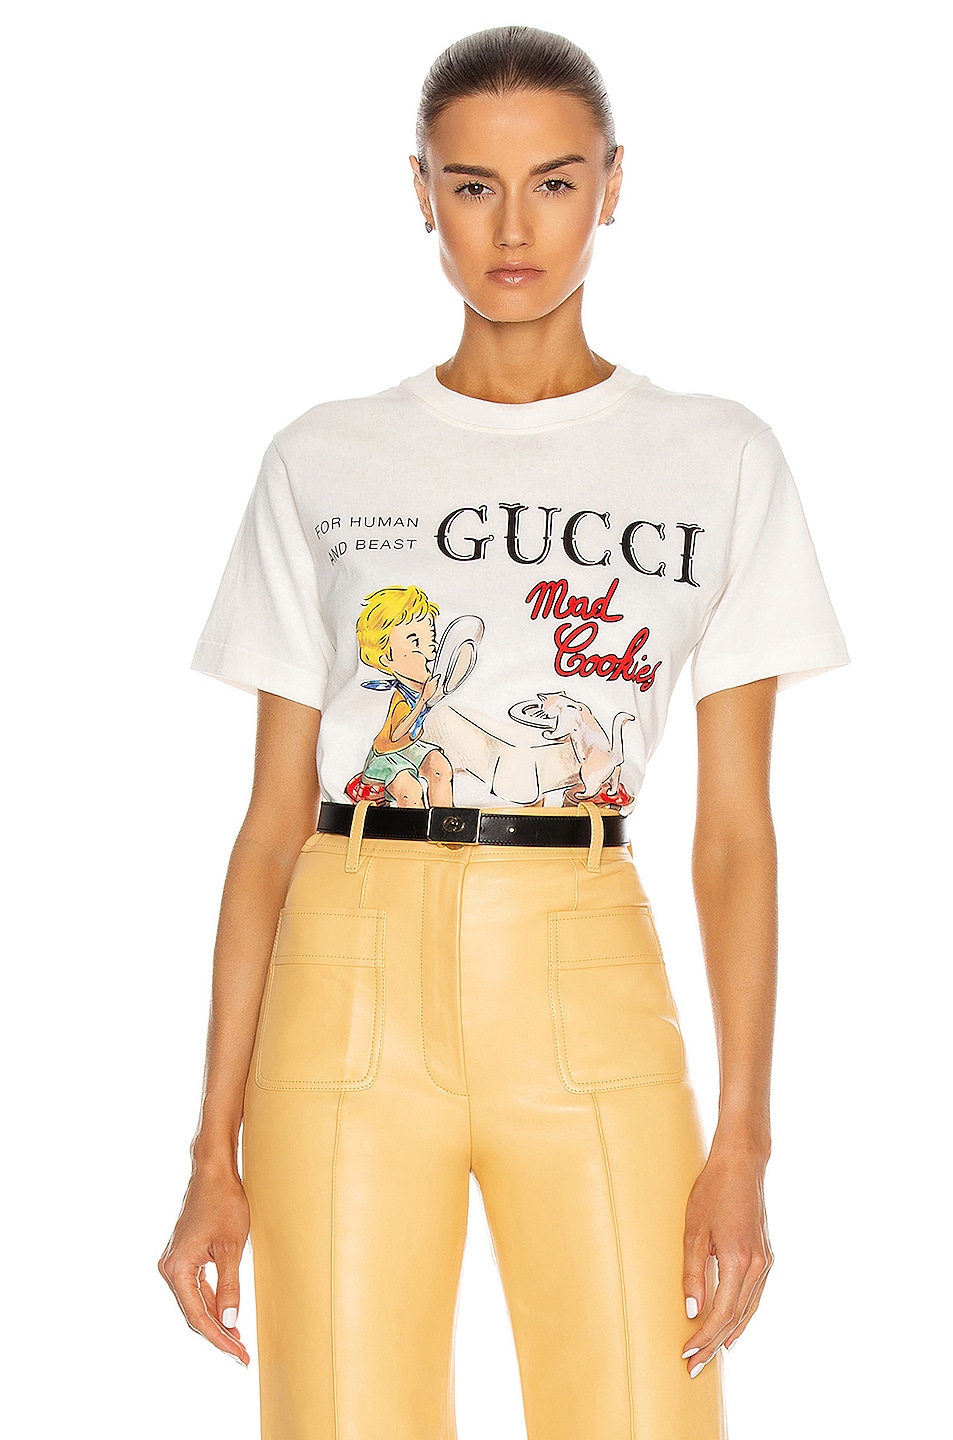 Gucci Mad Cookies T Shirt in Sunlight | FWRD